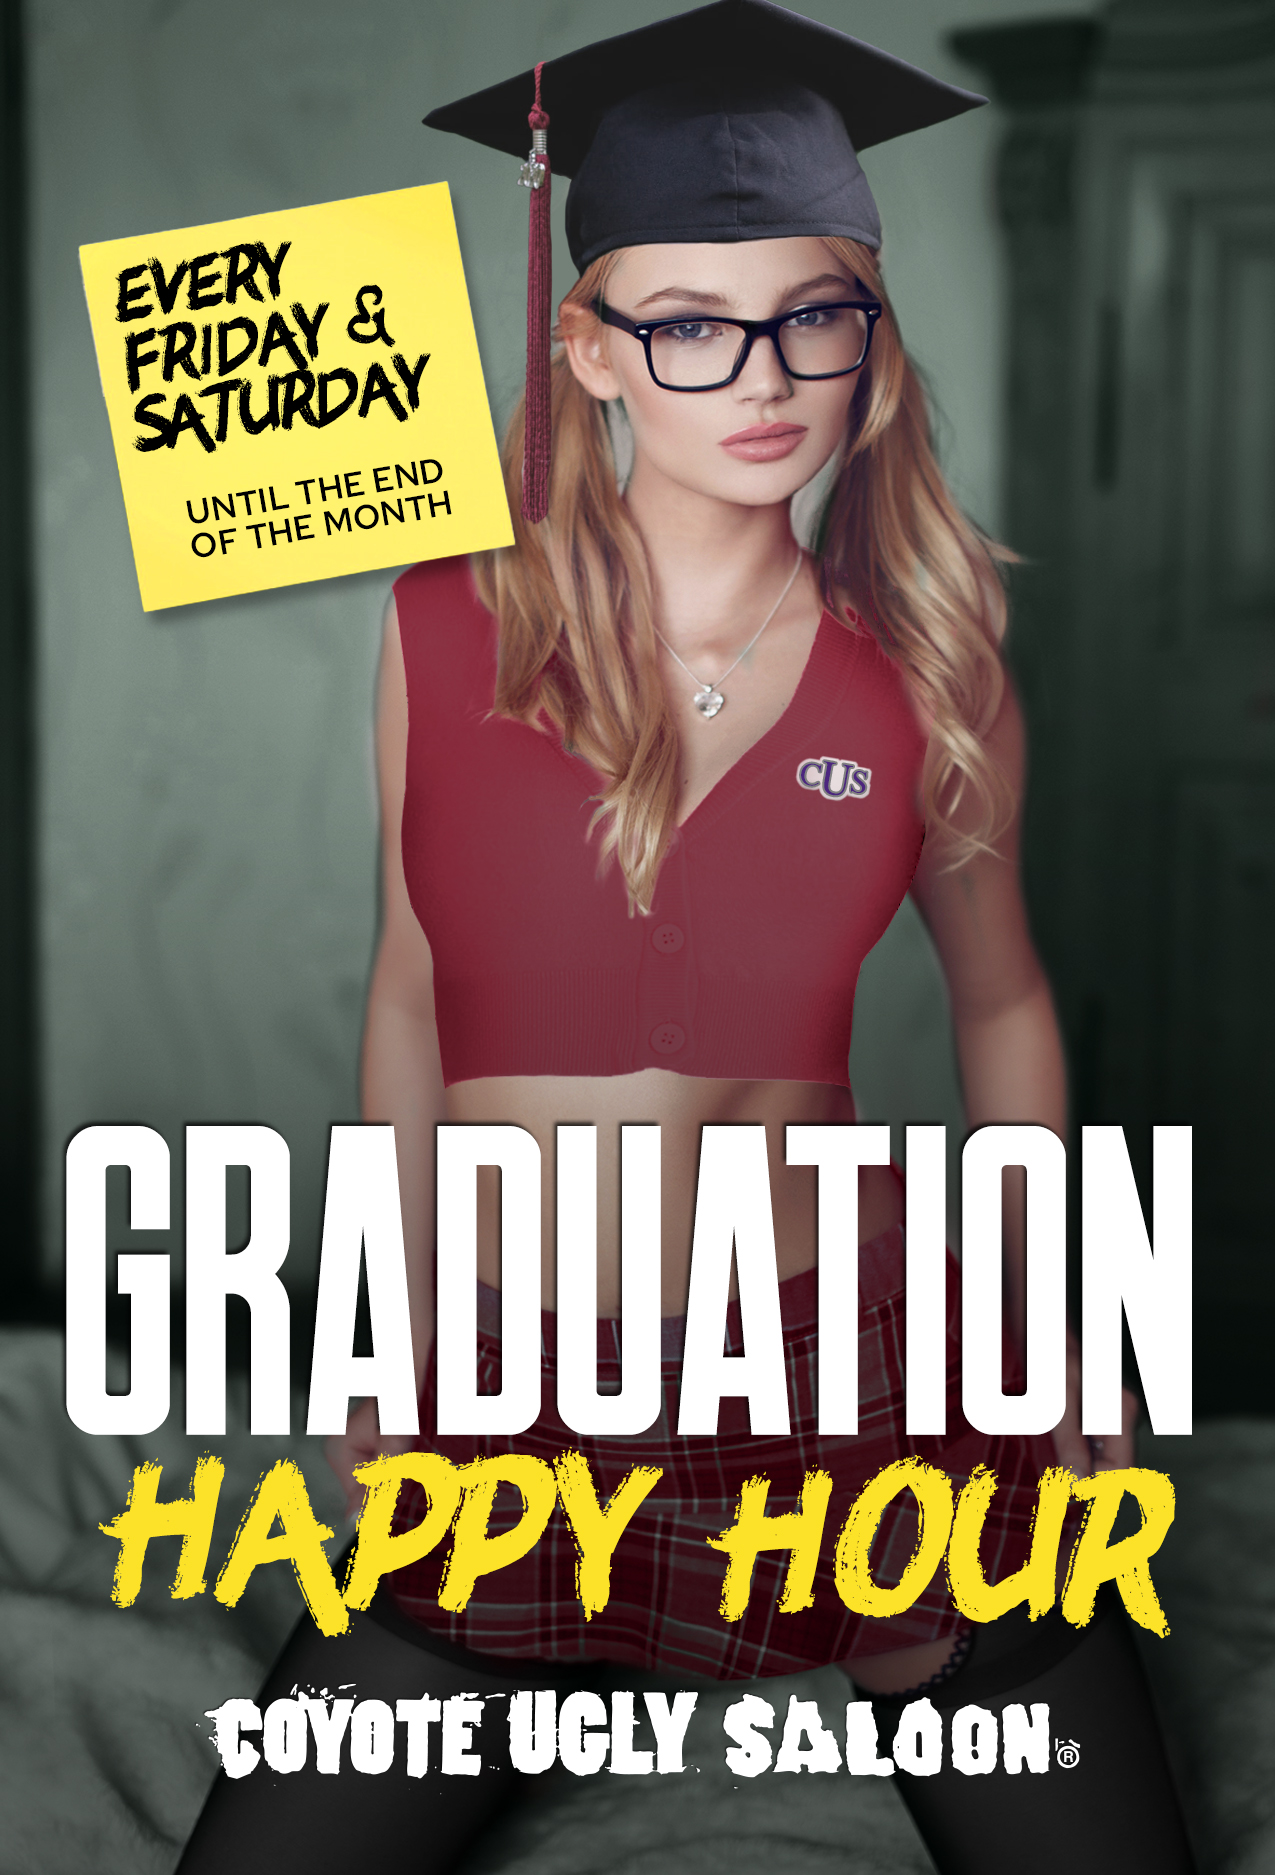 Graduation Happy Hour in New Orleans on May 21, 2022